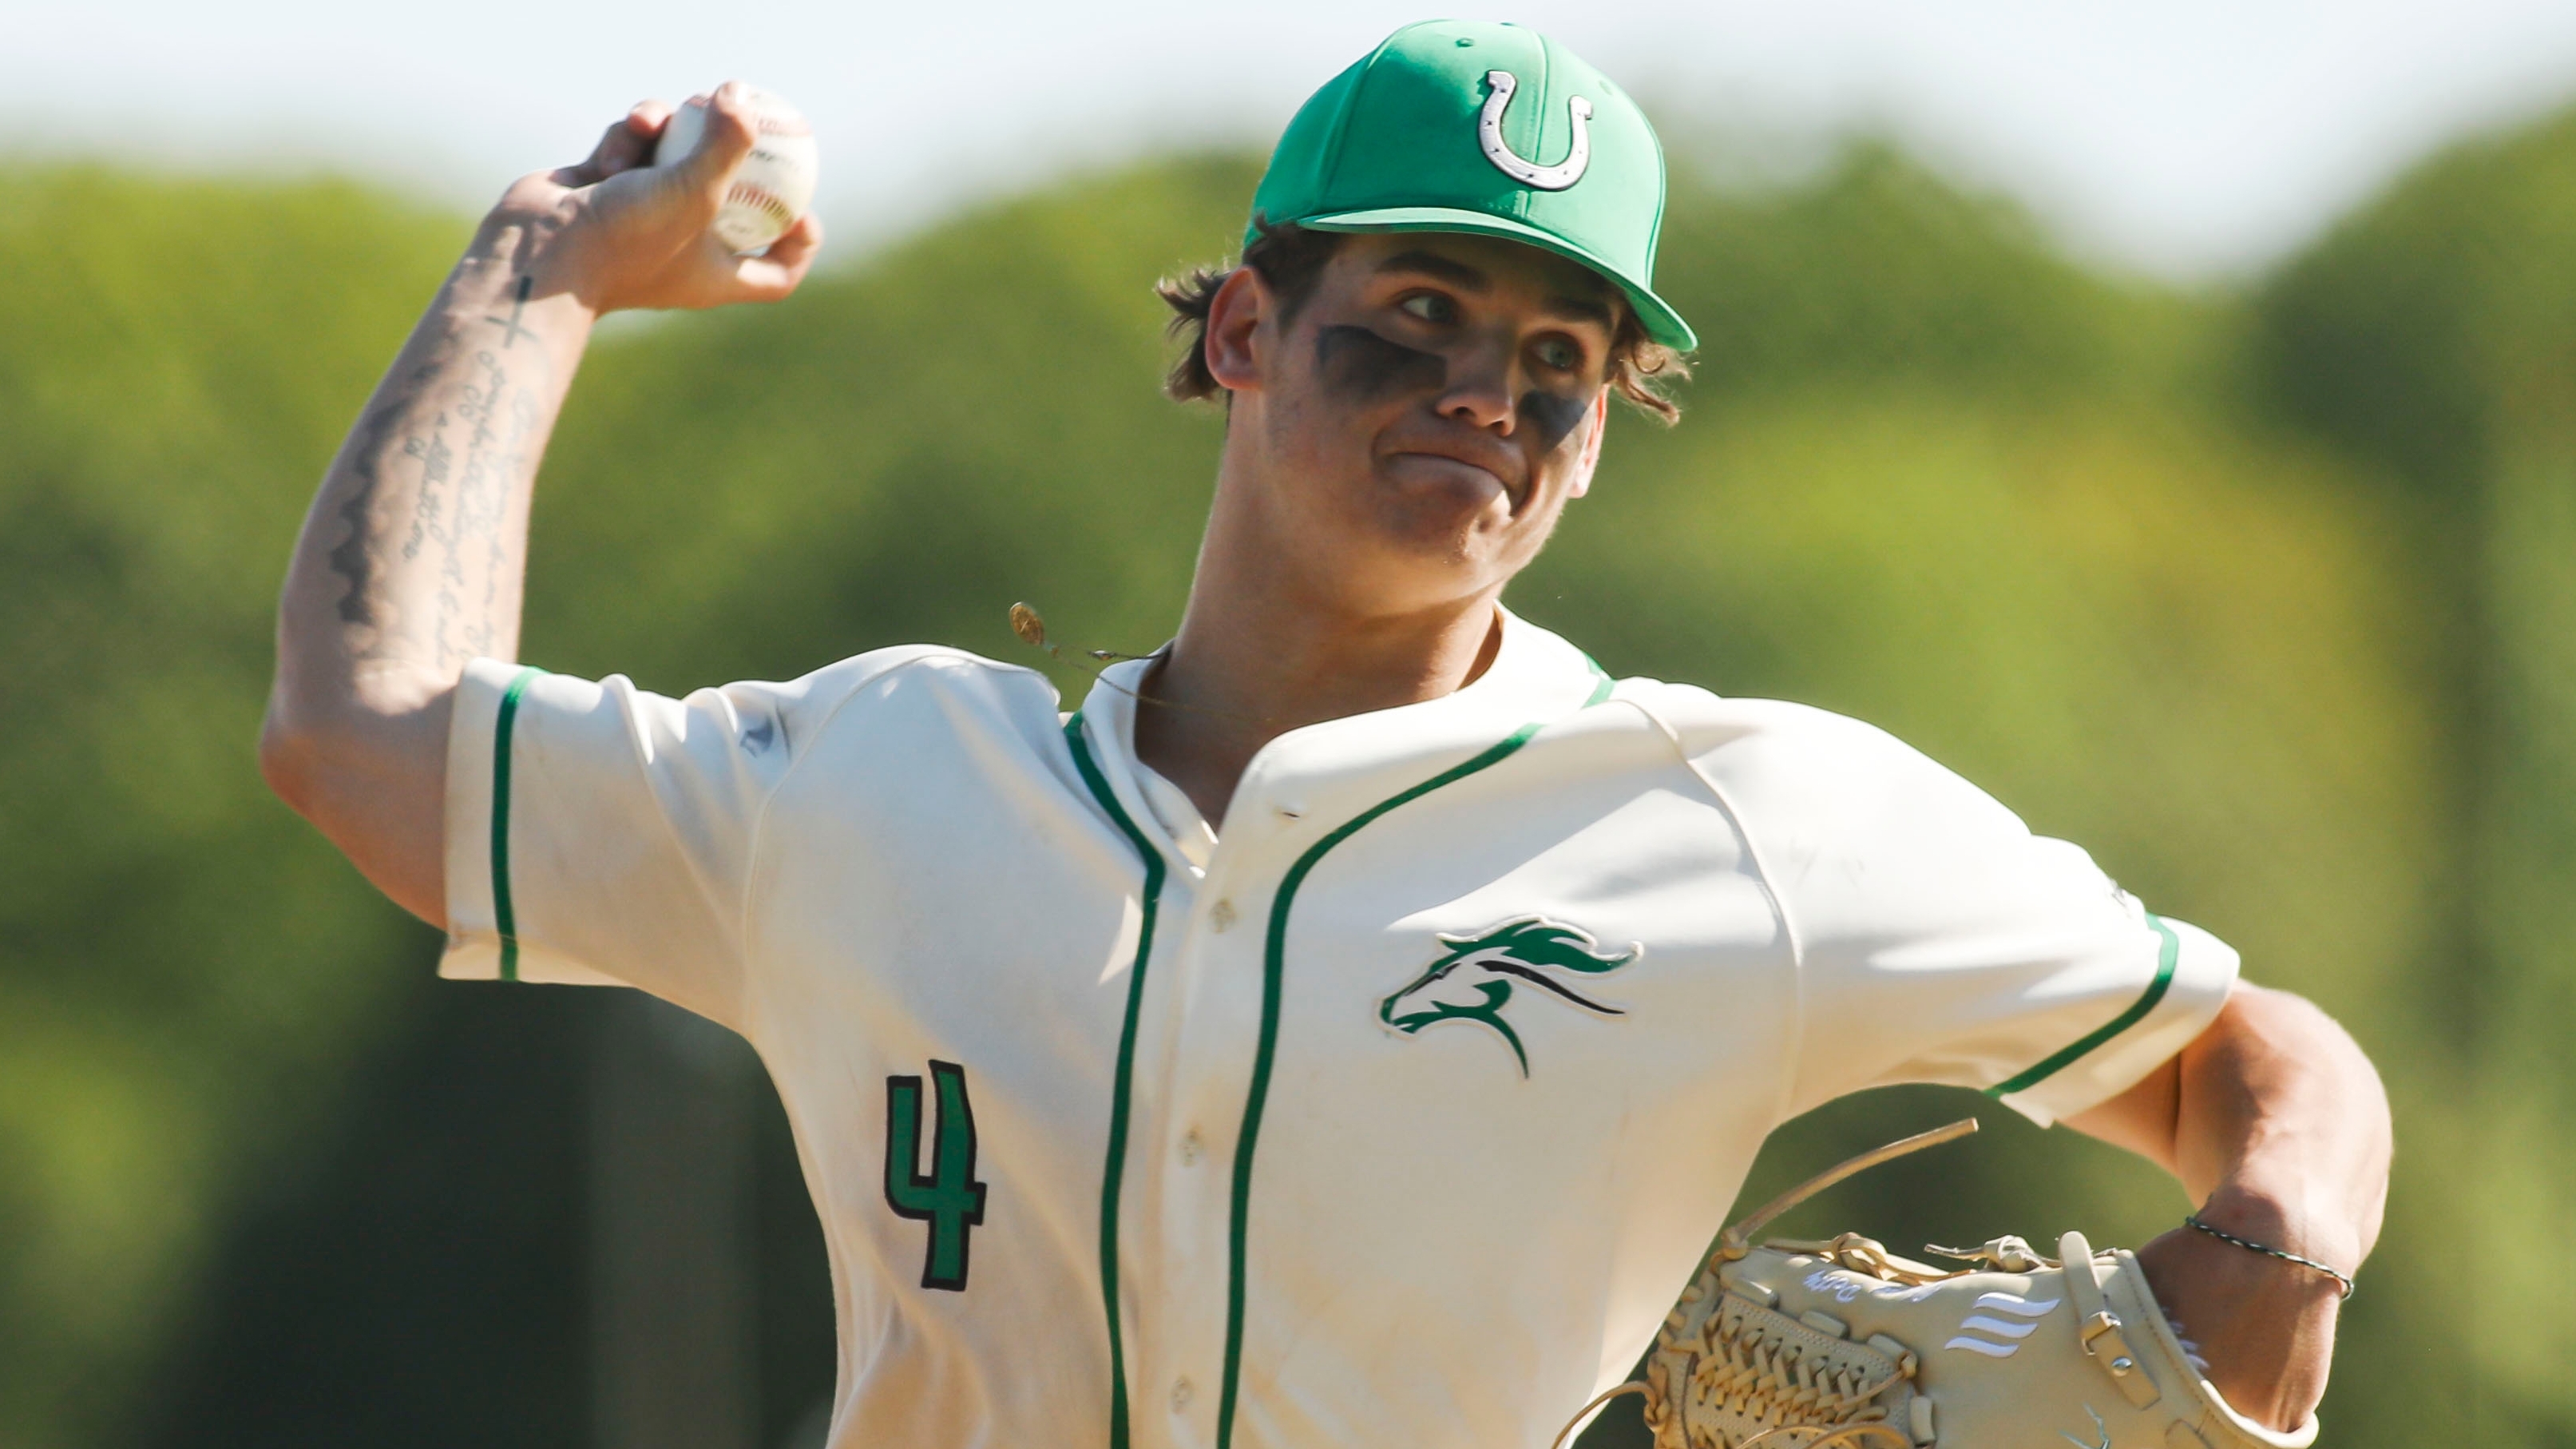 Jack Leiter, former Delbarton standout, taken second overall in the 2021 MLB  Draft 